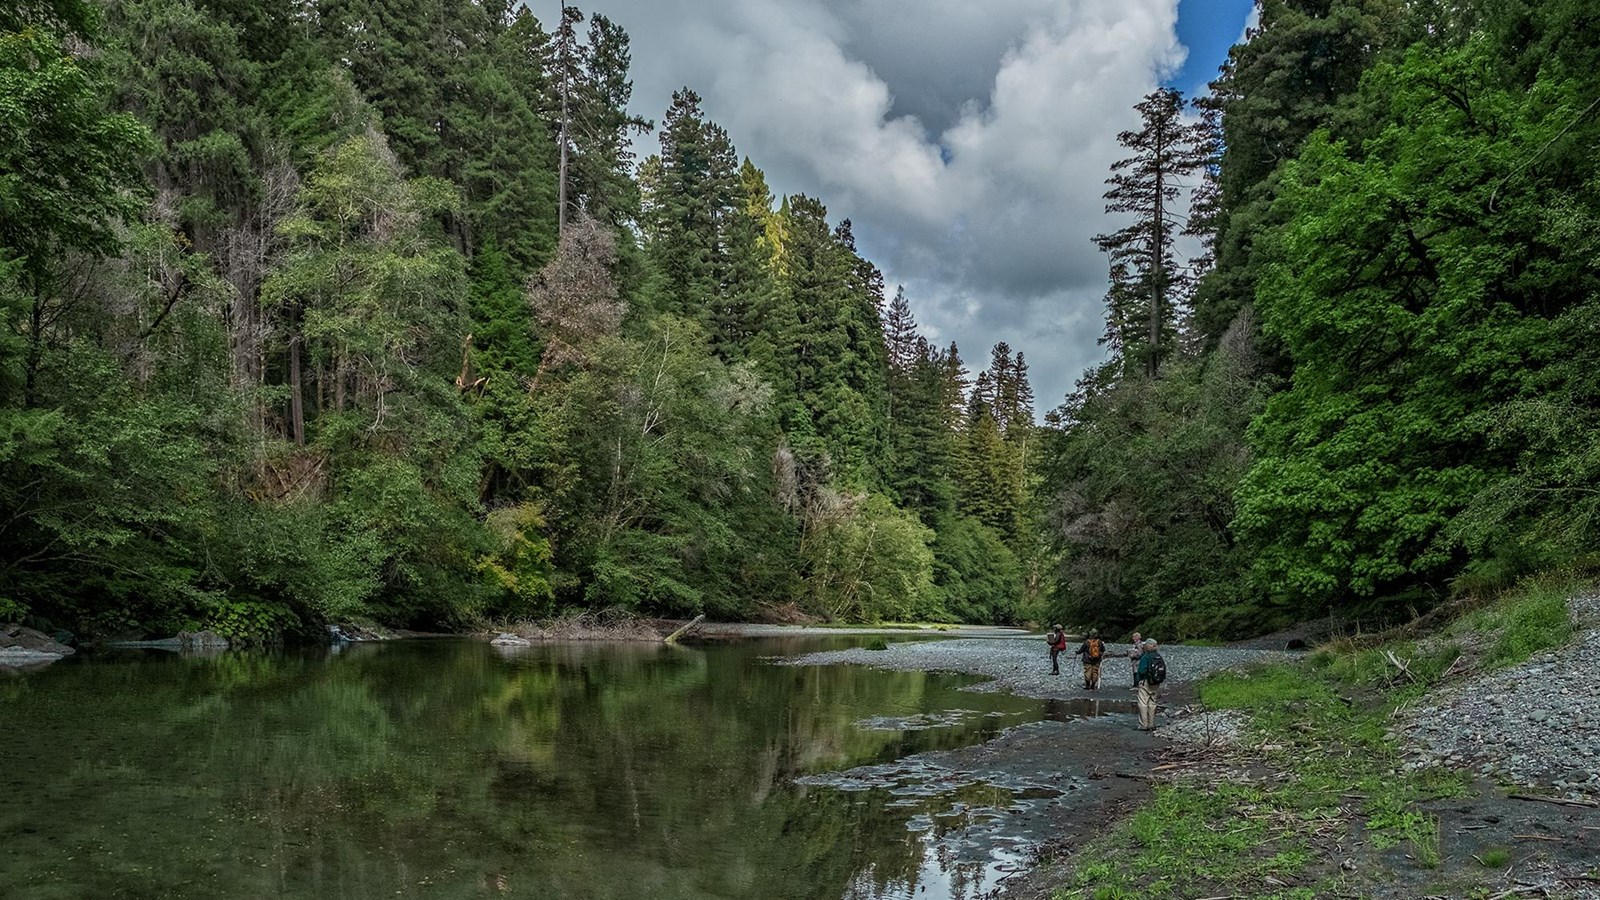 Redwood trees and other trees line a calm river. Three hikers walk on gravel bars.